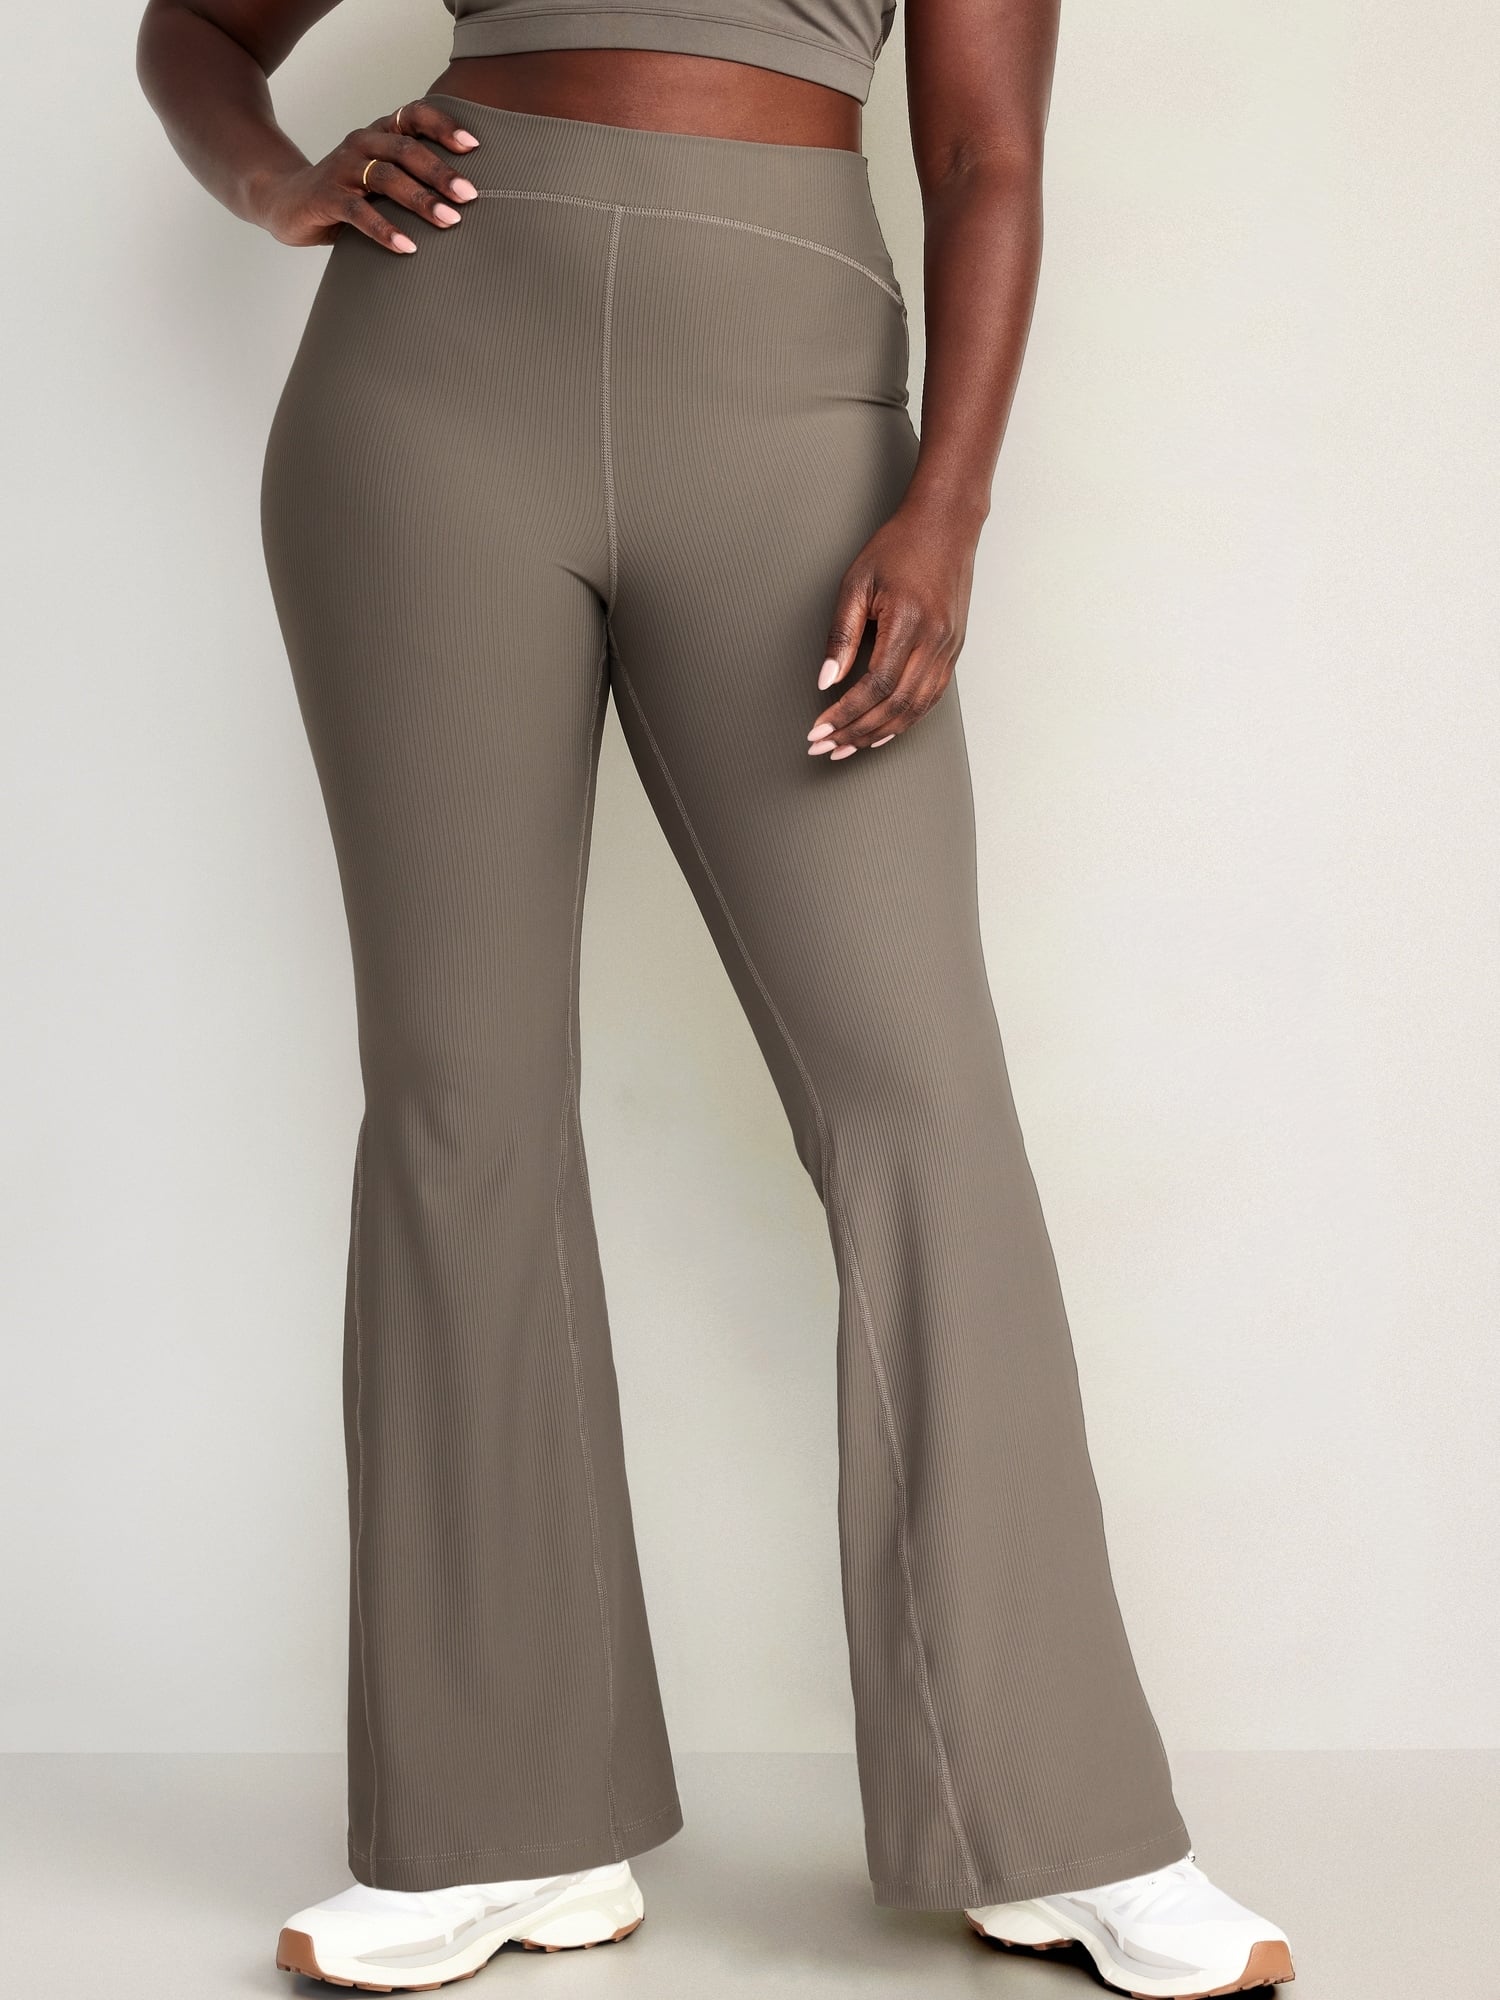 Extra High-Waisted PowerChill Super-Flare Pants for Women